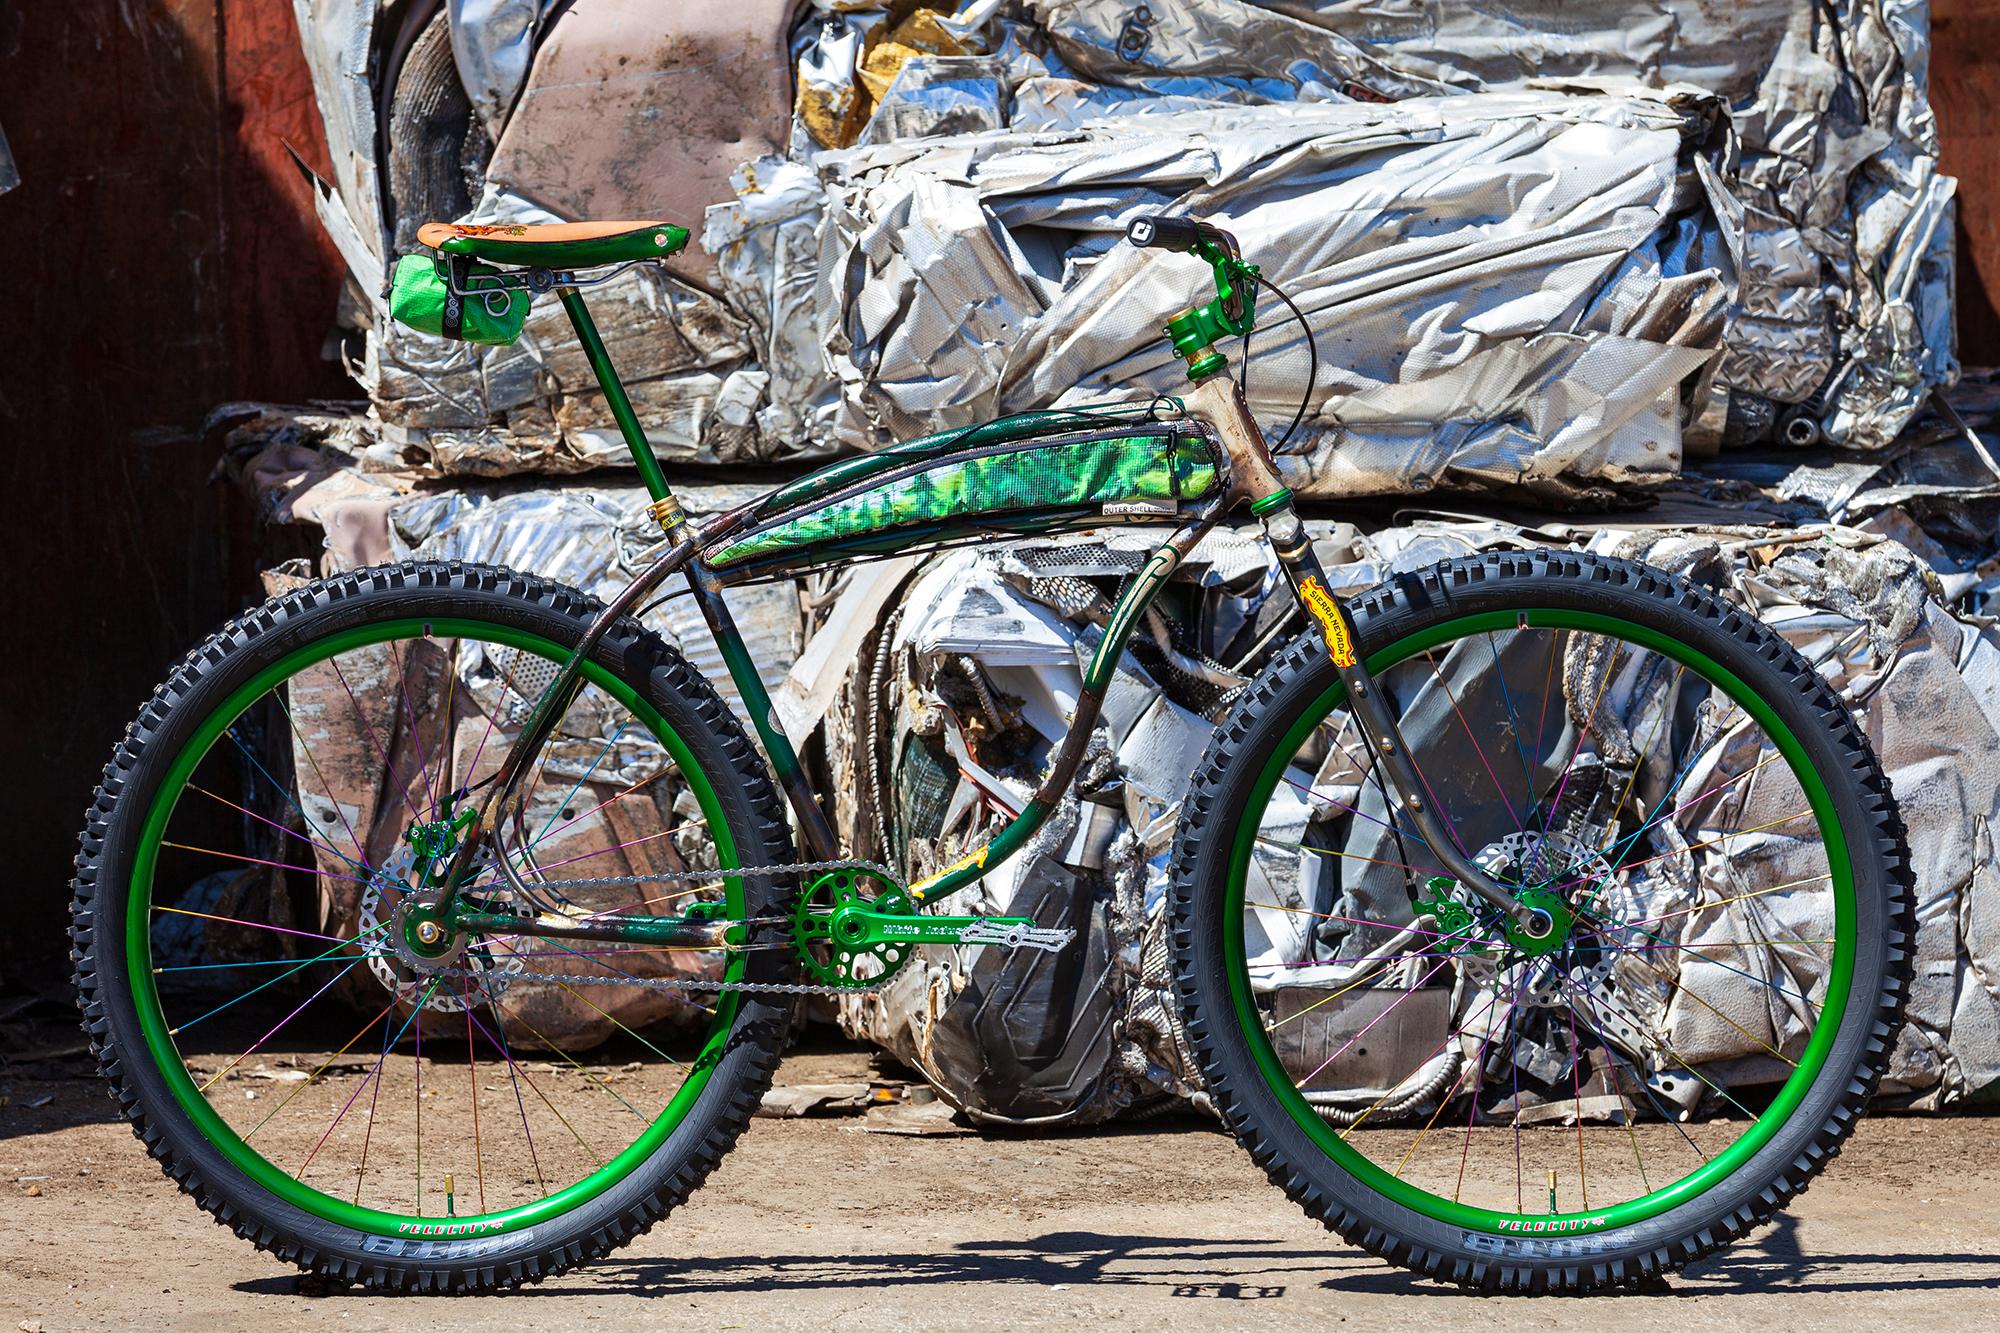 Finished-Bike-at-Recycling-Center-2.jpg